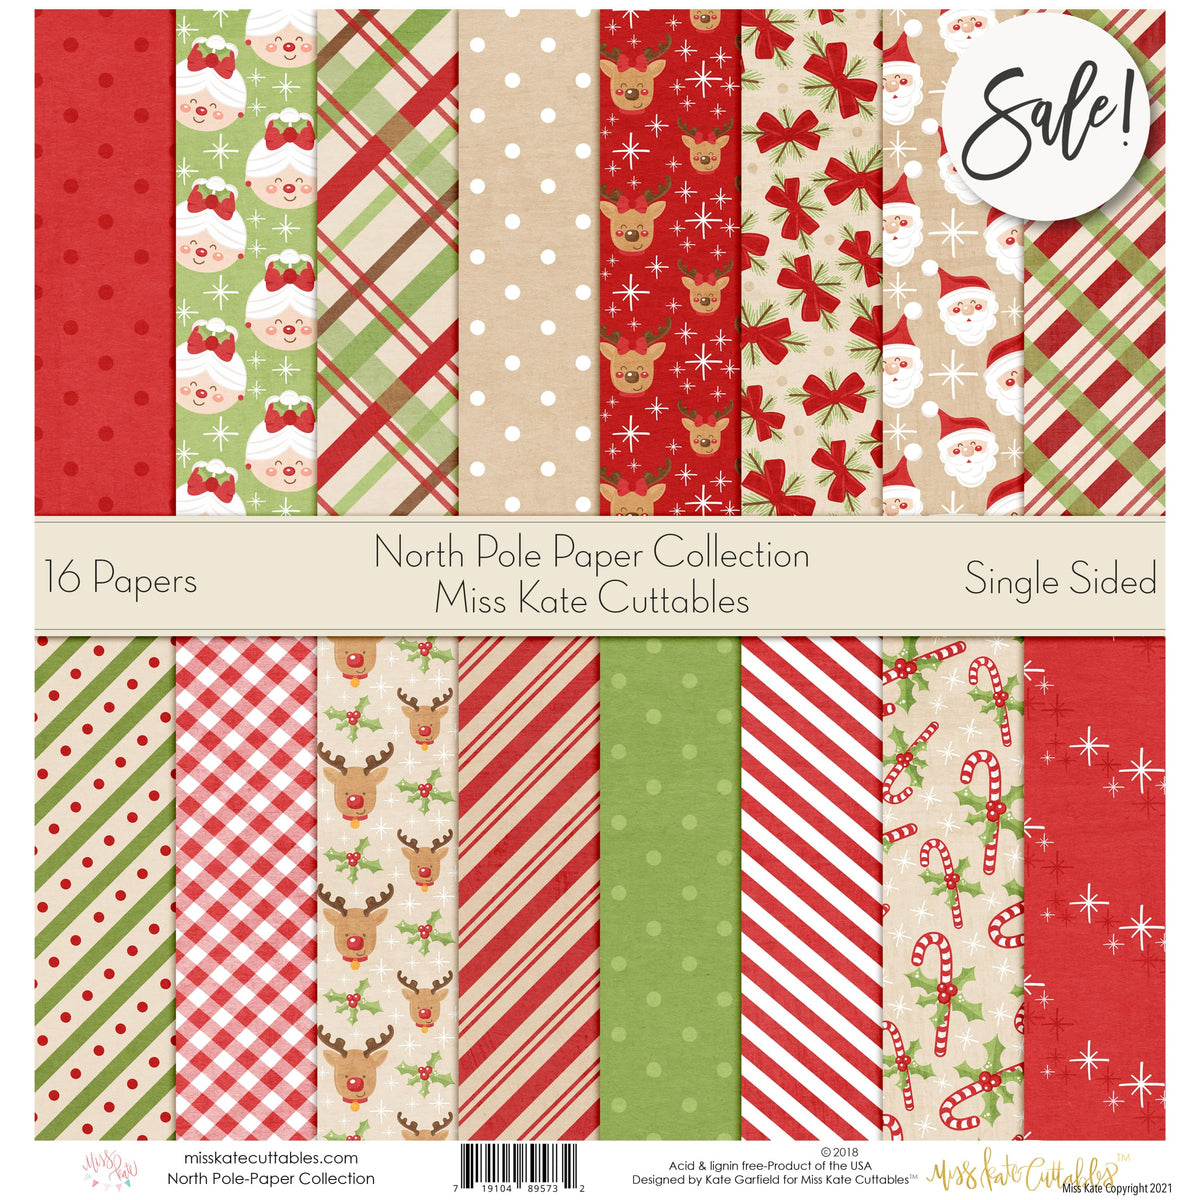 Provo Craft Scrapbooking Slab Christmas Holiday 12x12 Paper 90